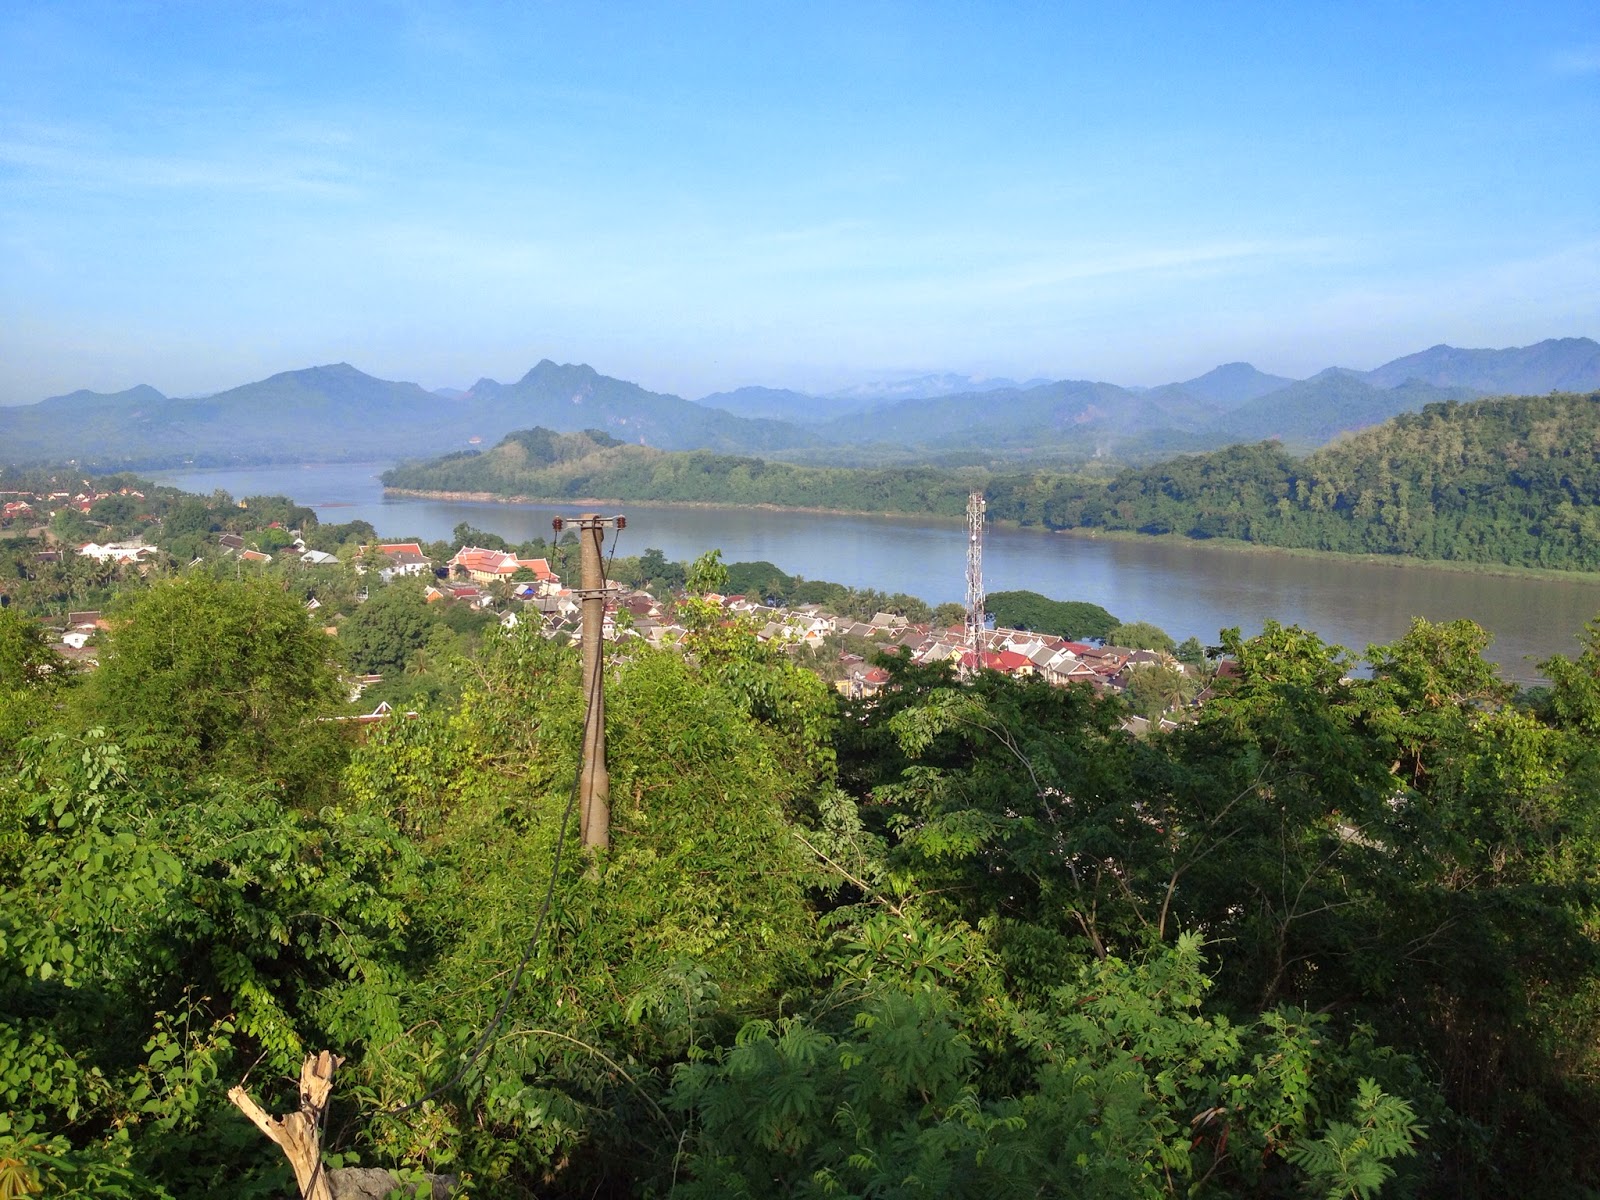 Luang Prabang - 360 degree view from the top of Phousi Hill